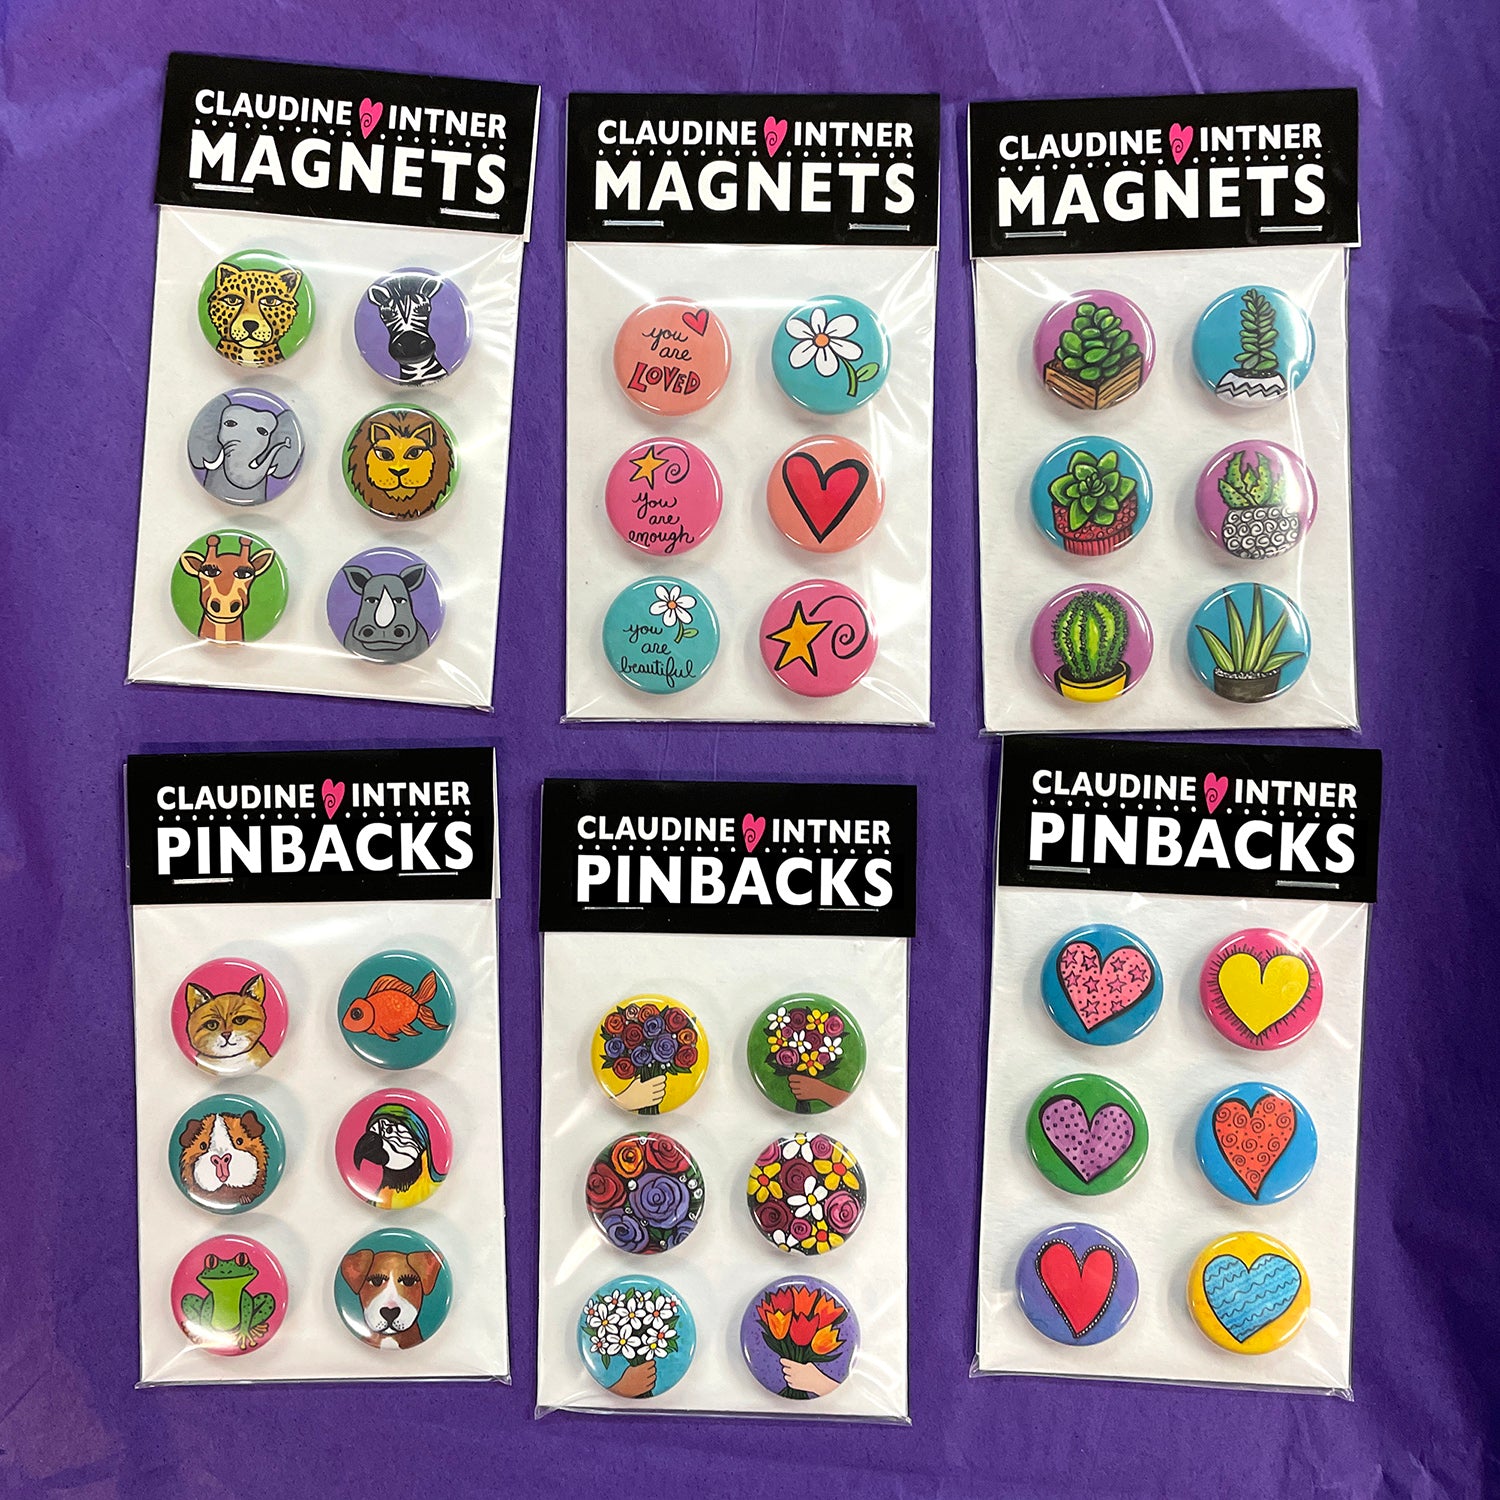 Wine Magnets or Pinback Buttons